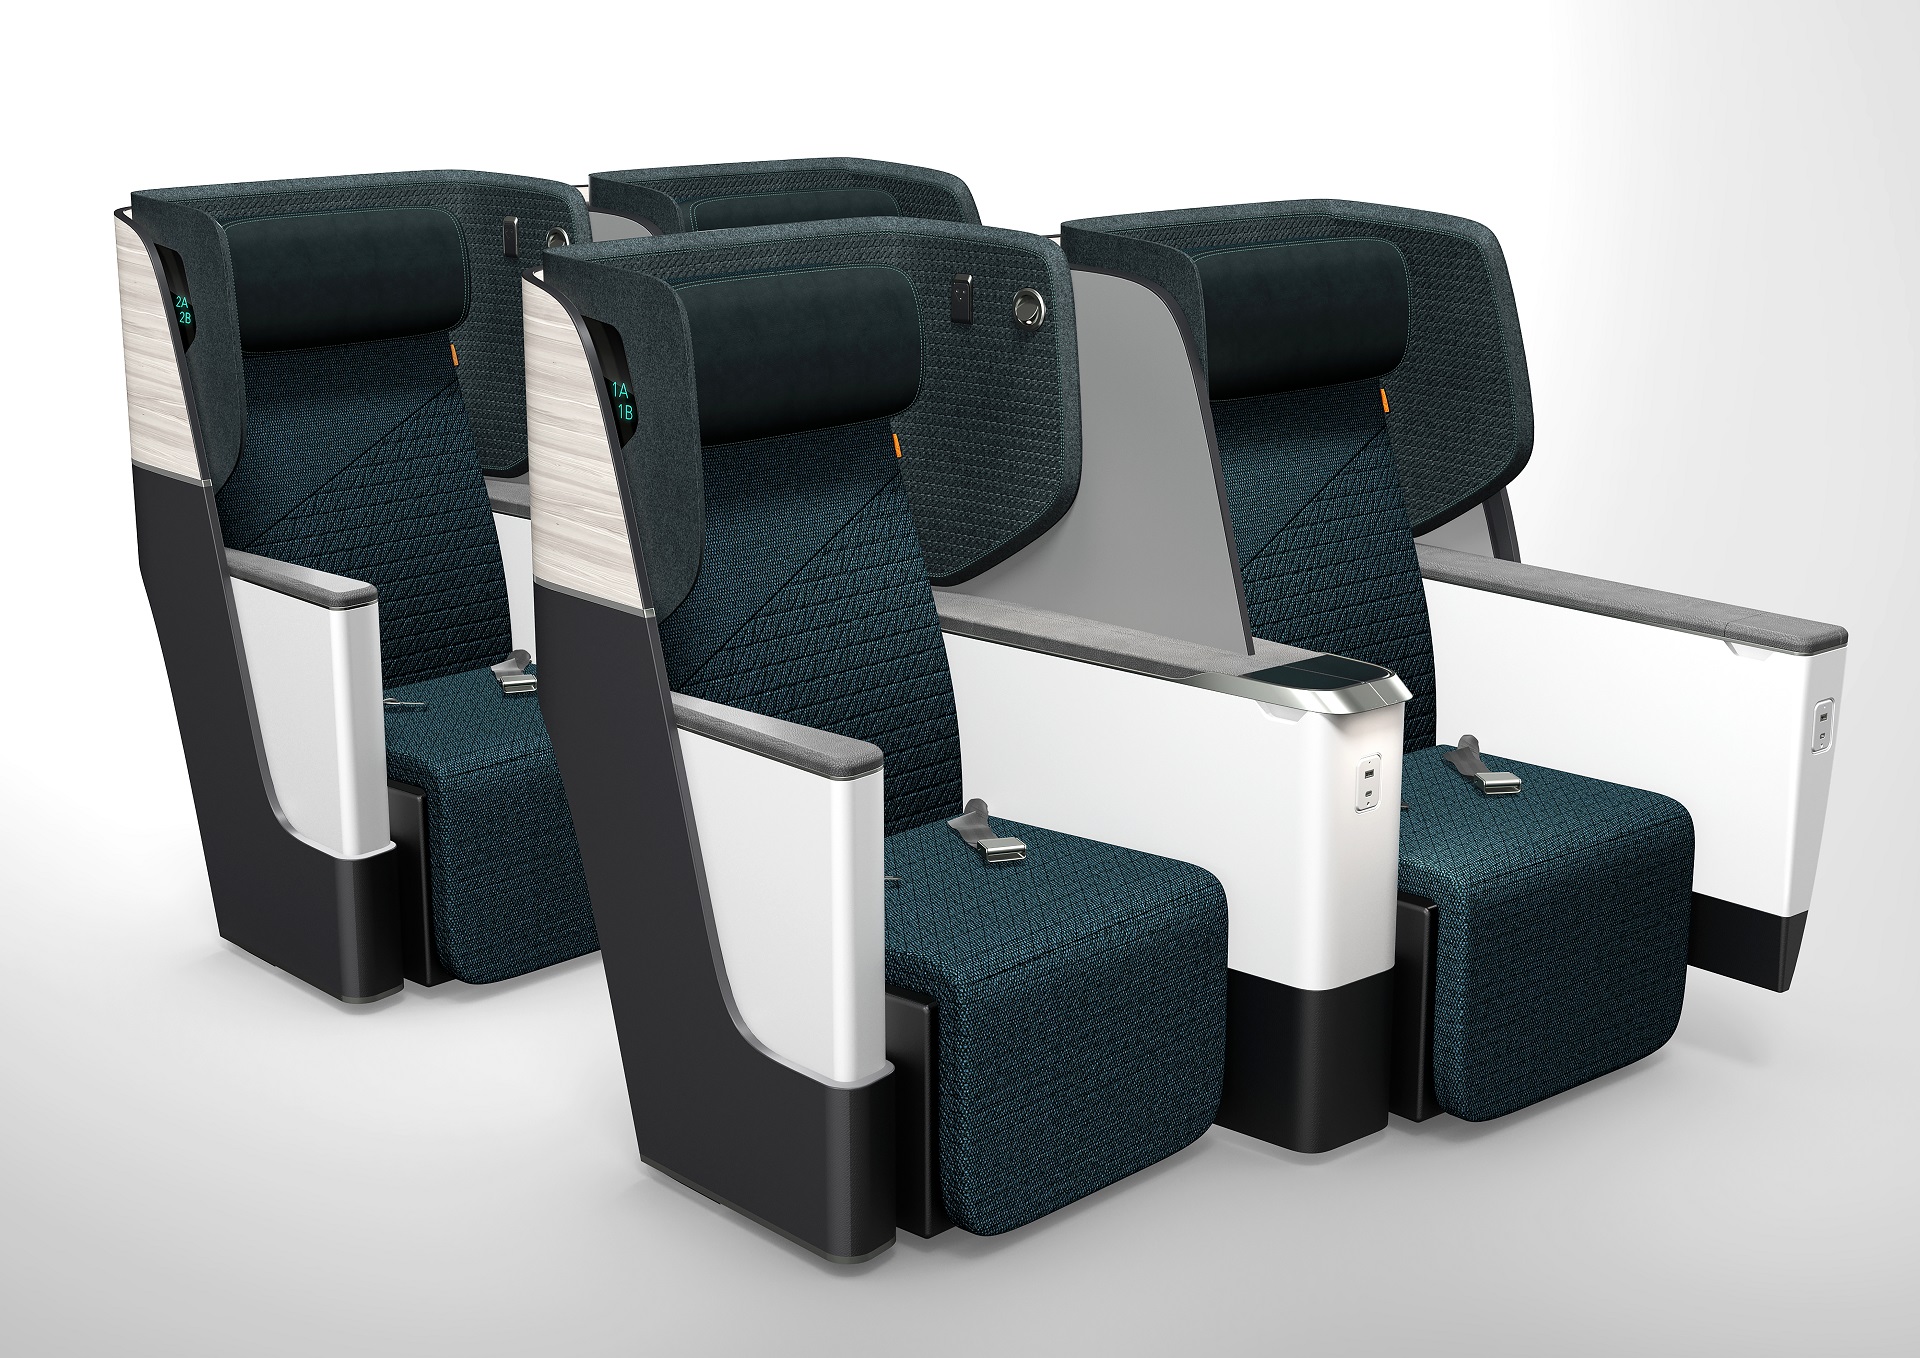 Rockwood Composites and Haeco Cabin Solutions have formed a partnership focusing on aircraft seating.